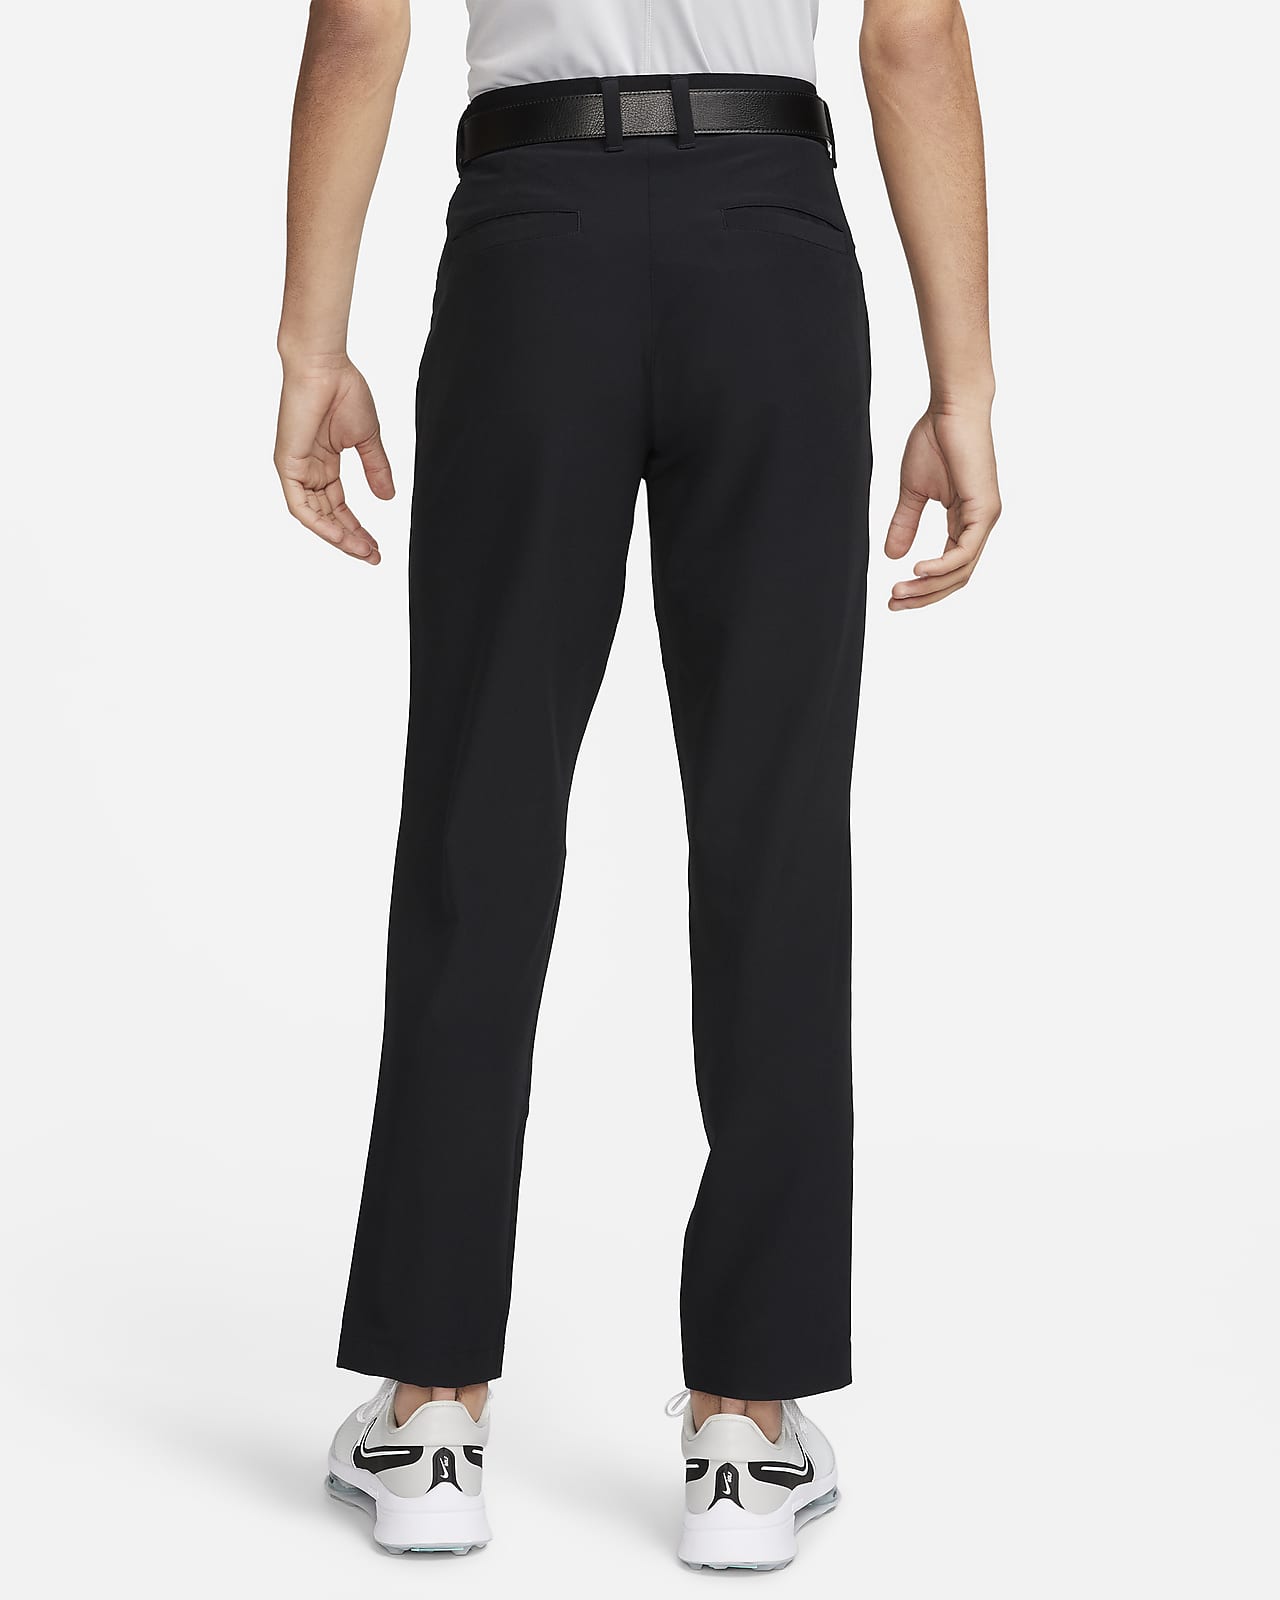 Charcoal Tech Golf Pants With Taper